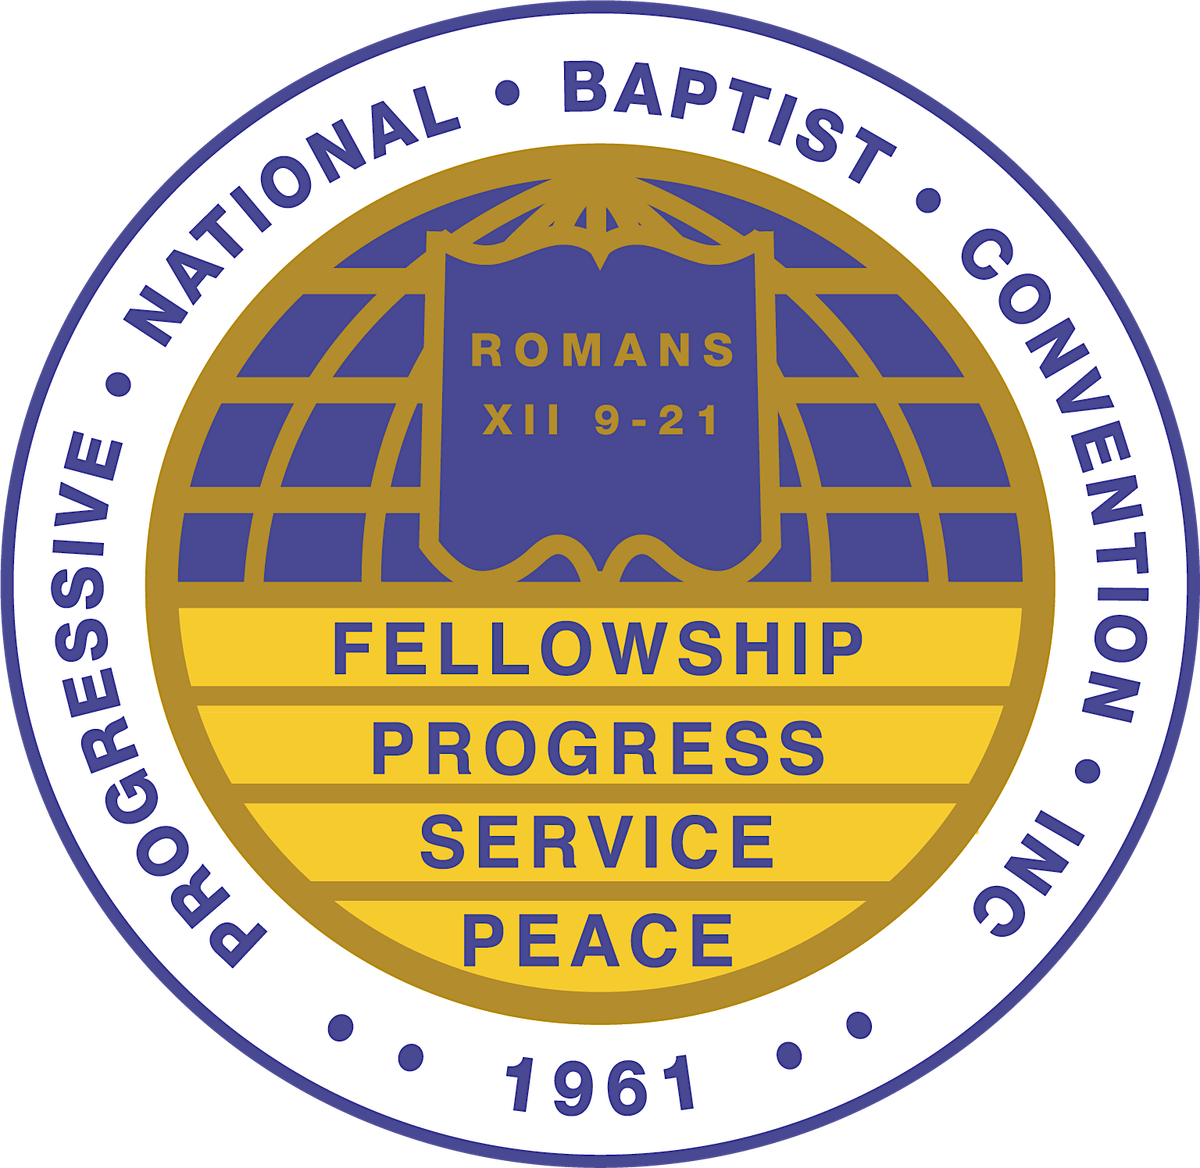 63rd Progressive National Baptist Convention Annual Session